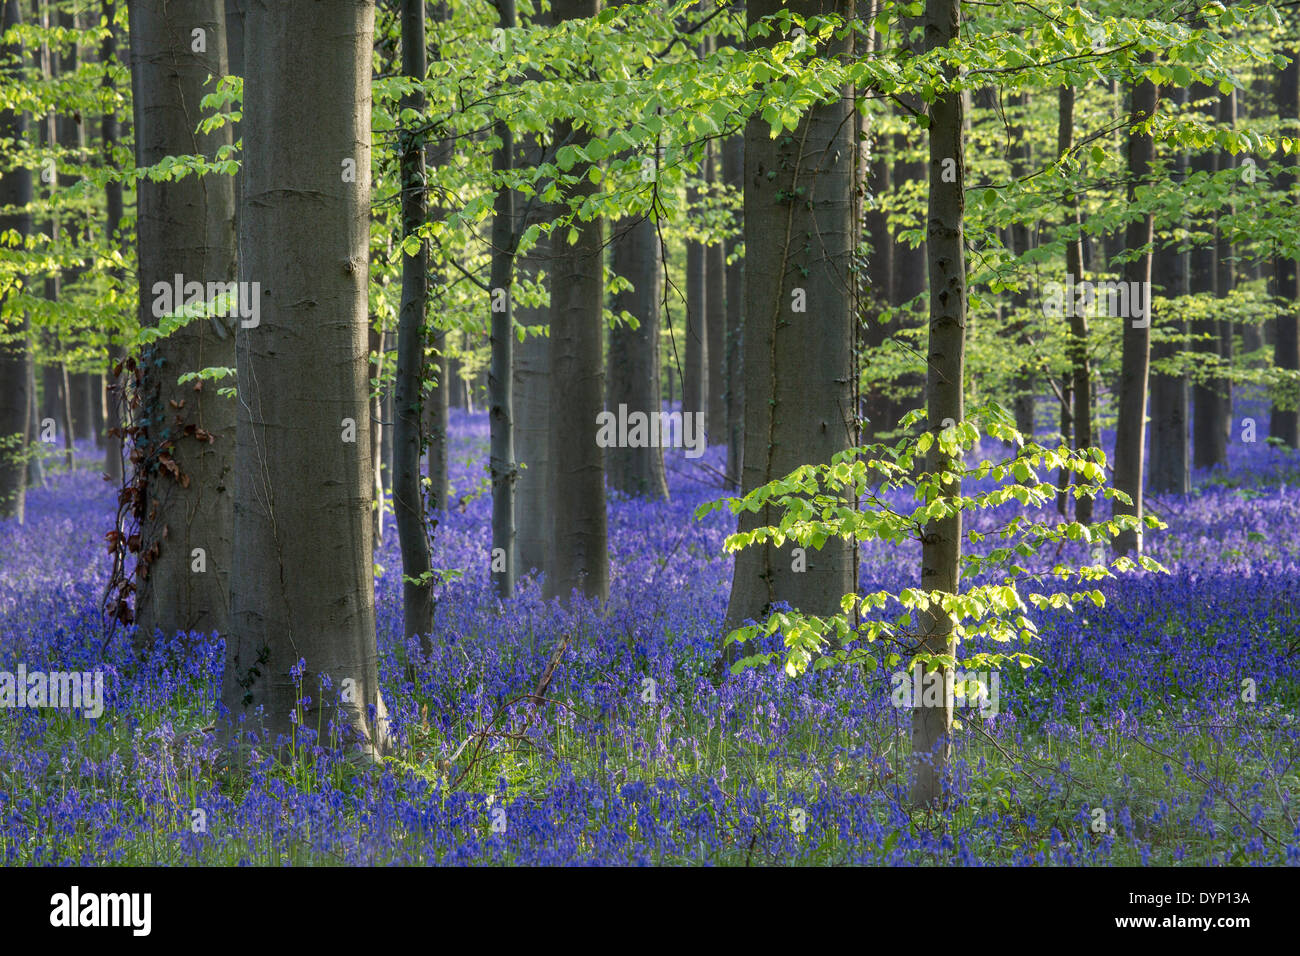 Bluebells (Endymion nonscriptus) in flower in beech forest (Fagus sylvatica) in spring Stock Photo